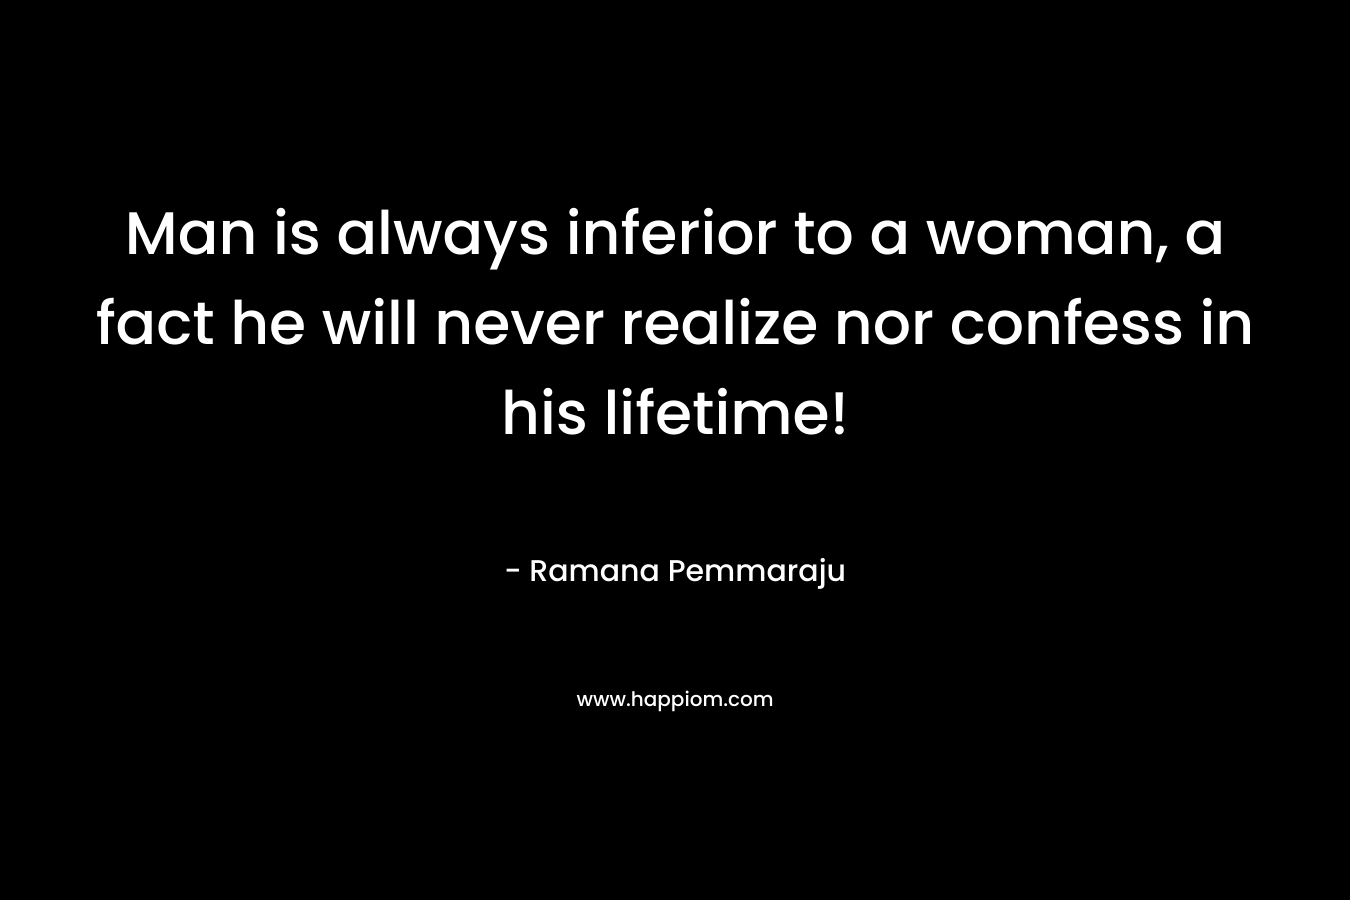 Man is always inferior to a woman, a fact he will never realize nor confess in his lifetime!